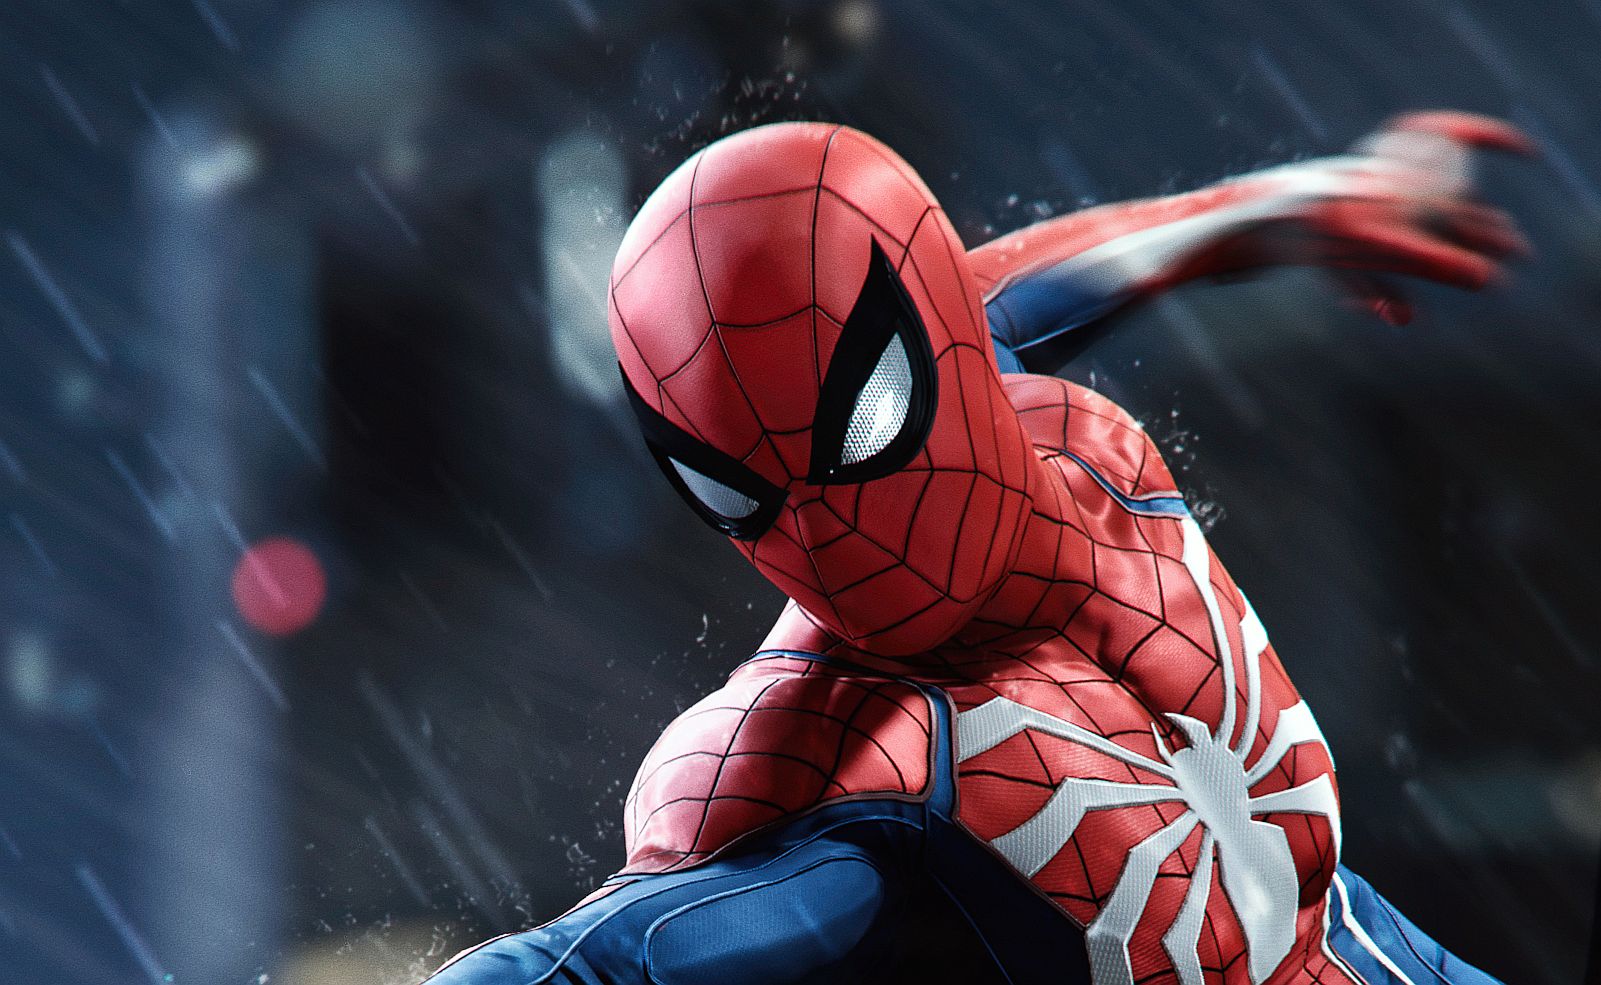 Image for NPD September 2018: Spider-Man, Forza Horizon 4 and NBA 2K19 are all winners